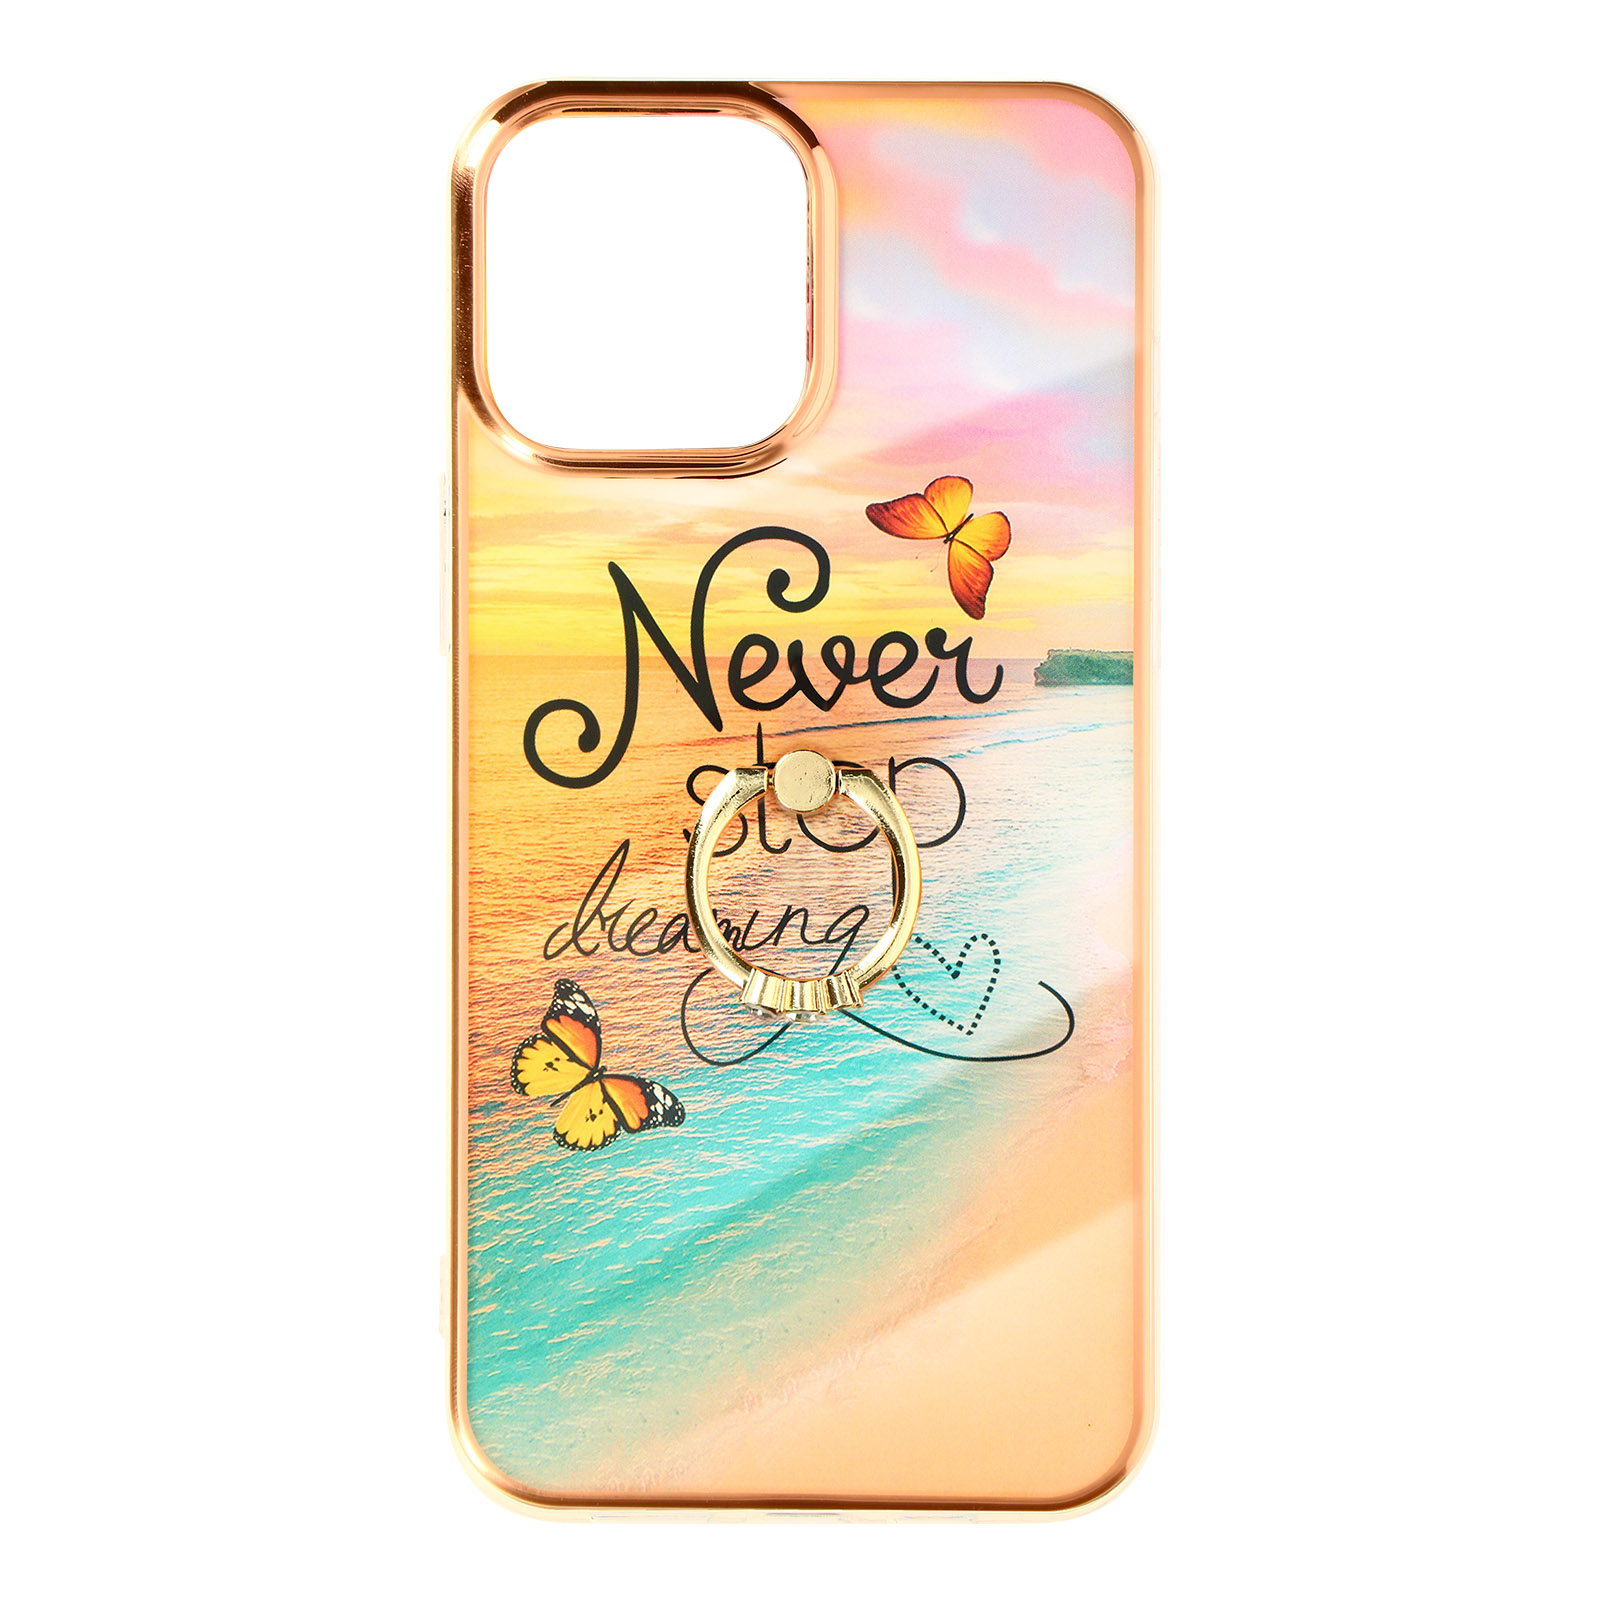 Orange Pro Stop Backcover, Dreaming Max, Series, AVIZAR Apple, iPhone Never 13